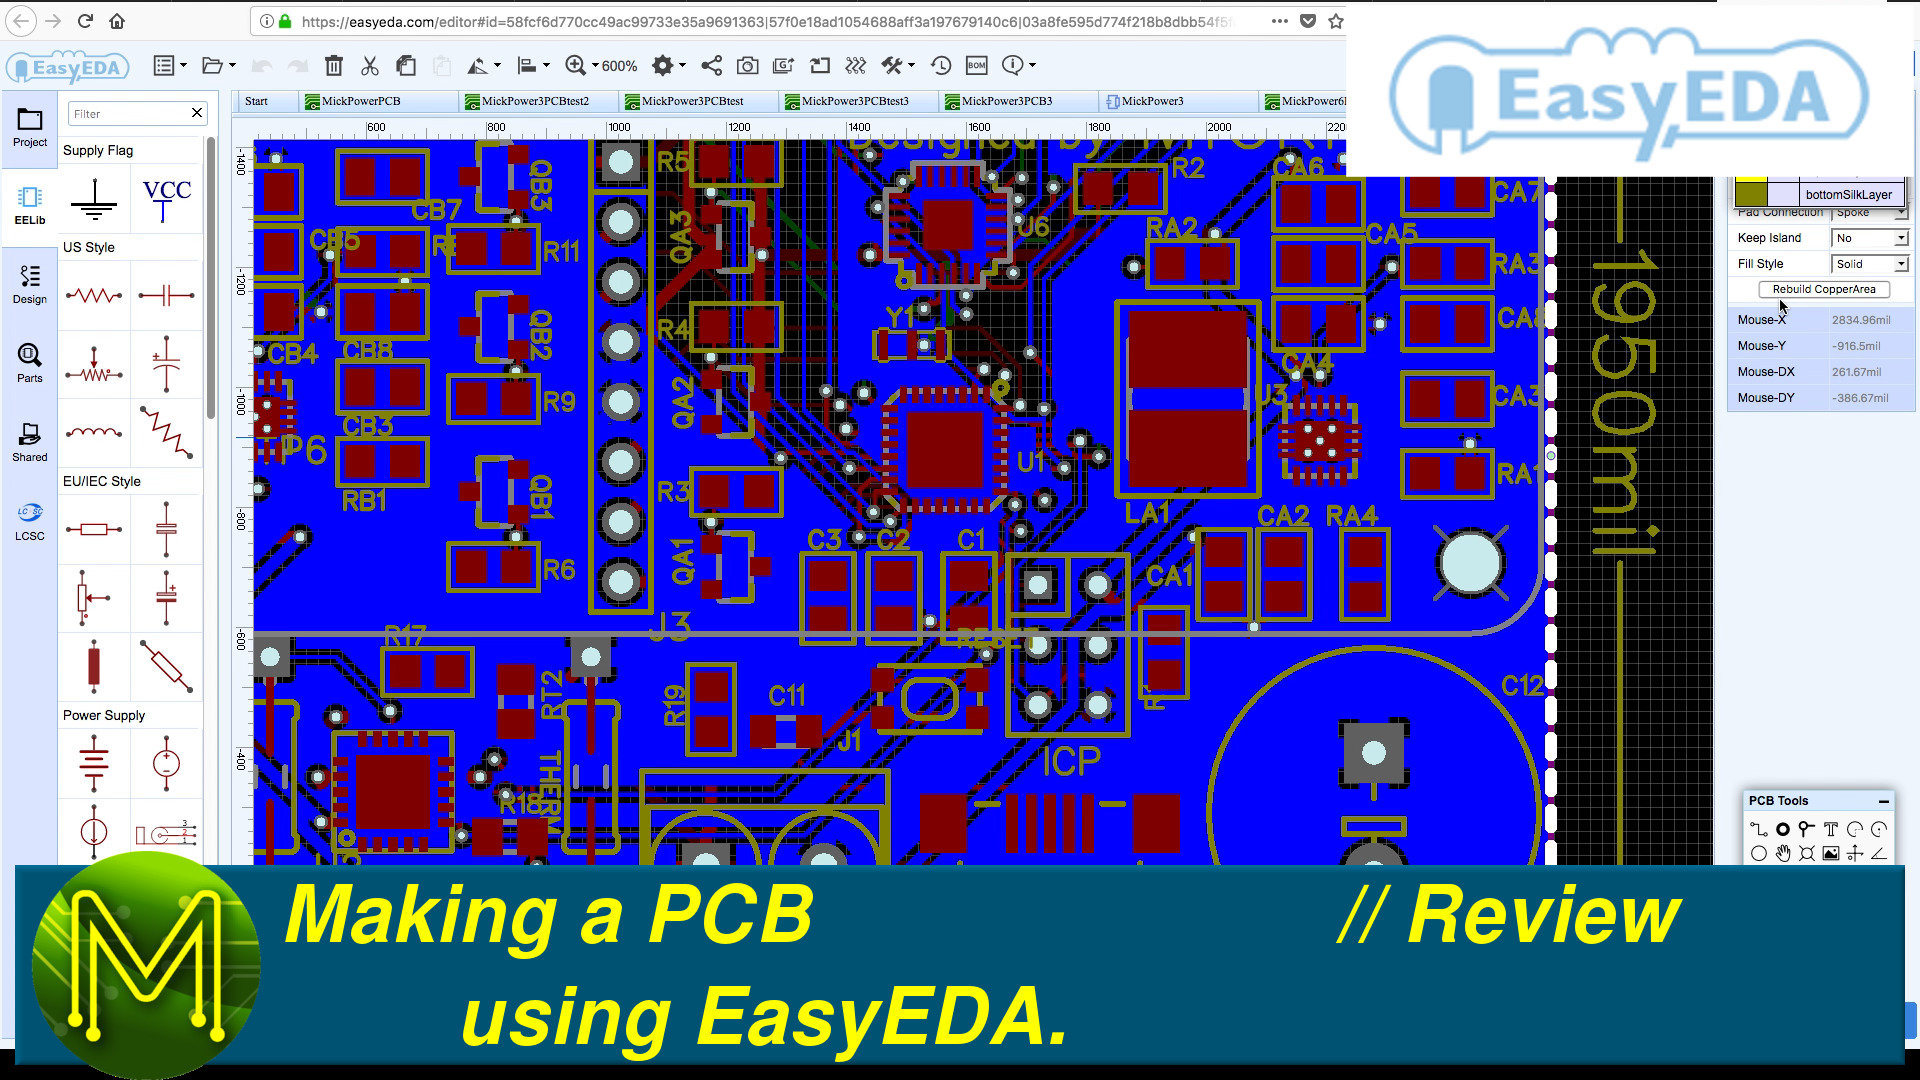 Making a PCB using EasyEDA. // Review